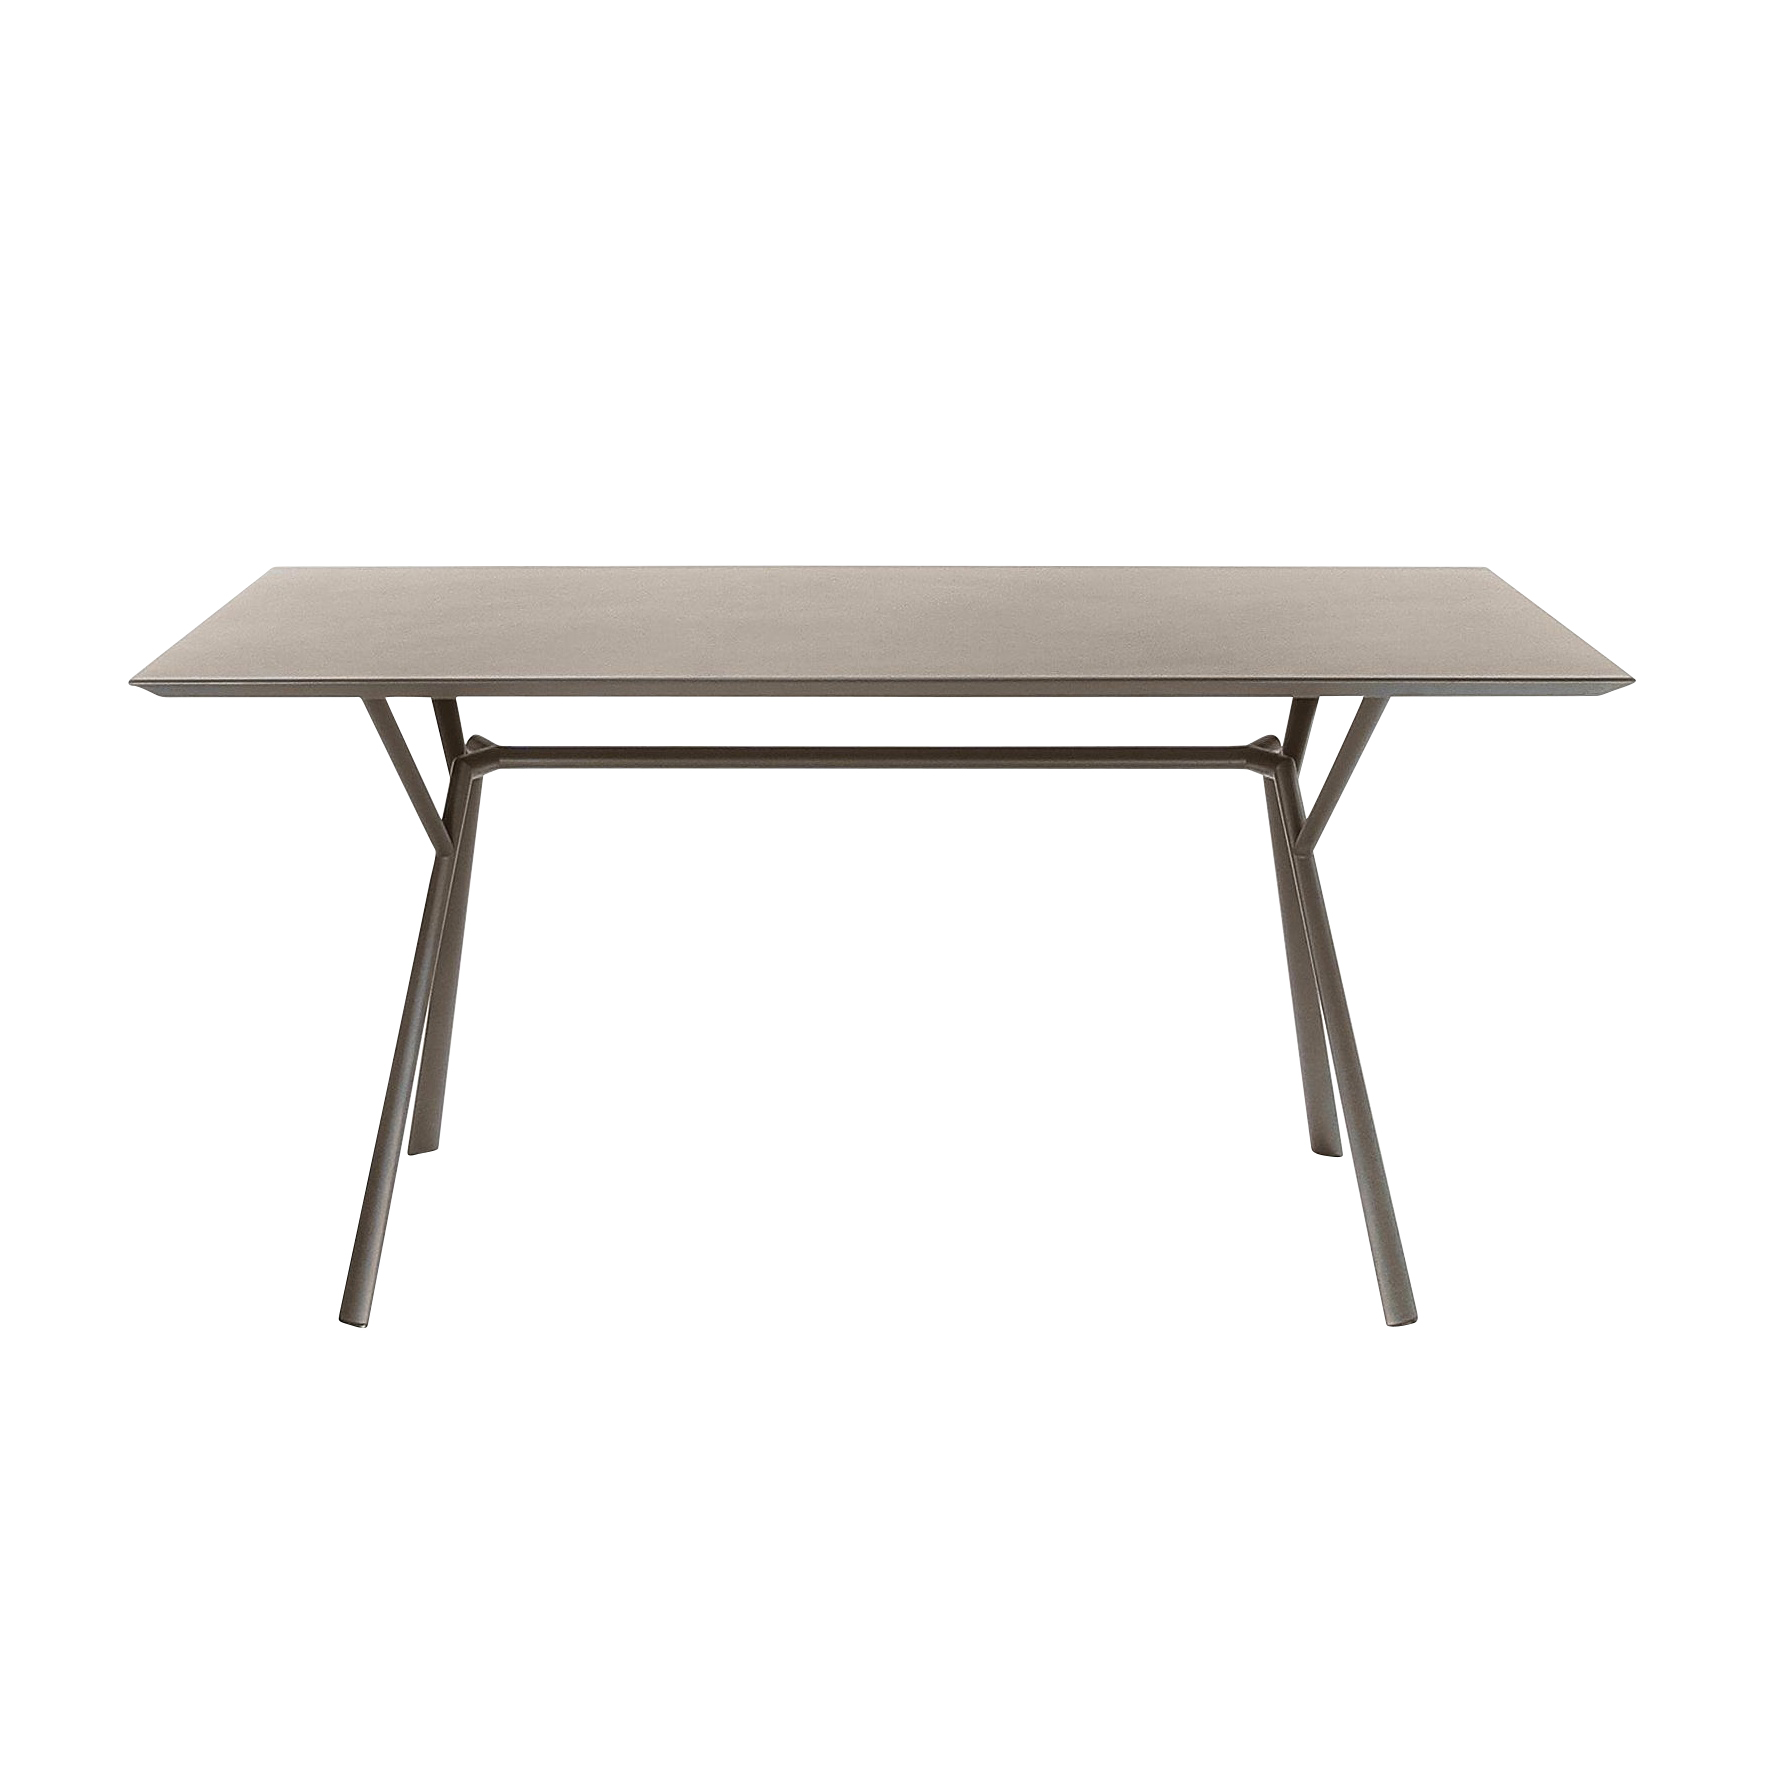 Fast - Radice Quadra Outdoor - Table - taupe/LxPxH 150x90x74cm/structure taupe